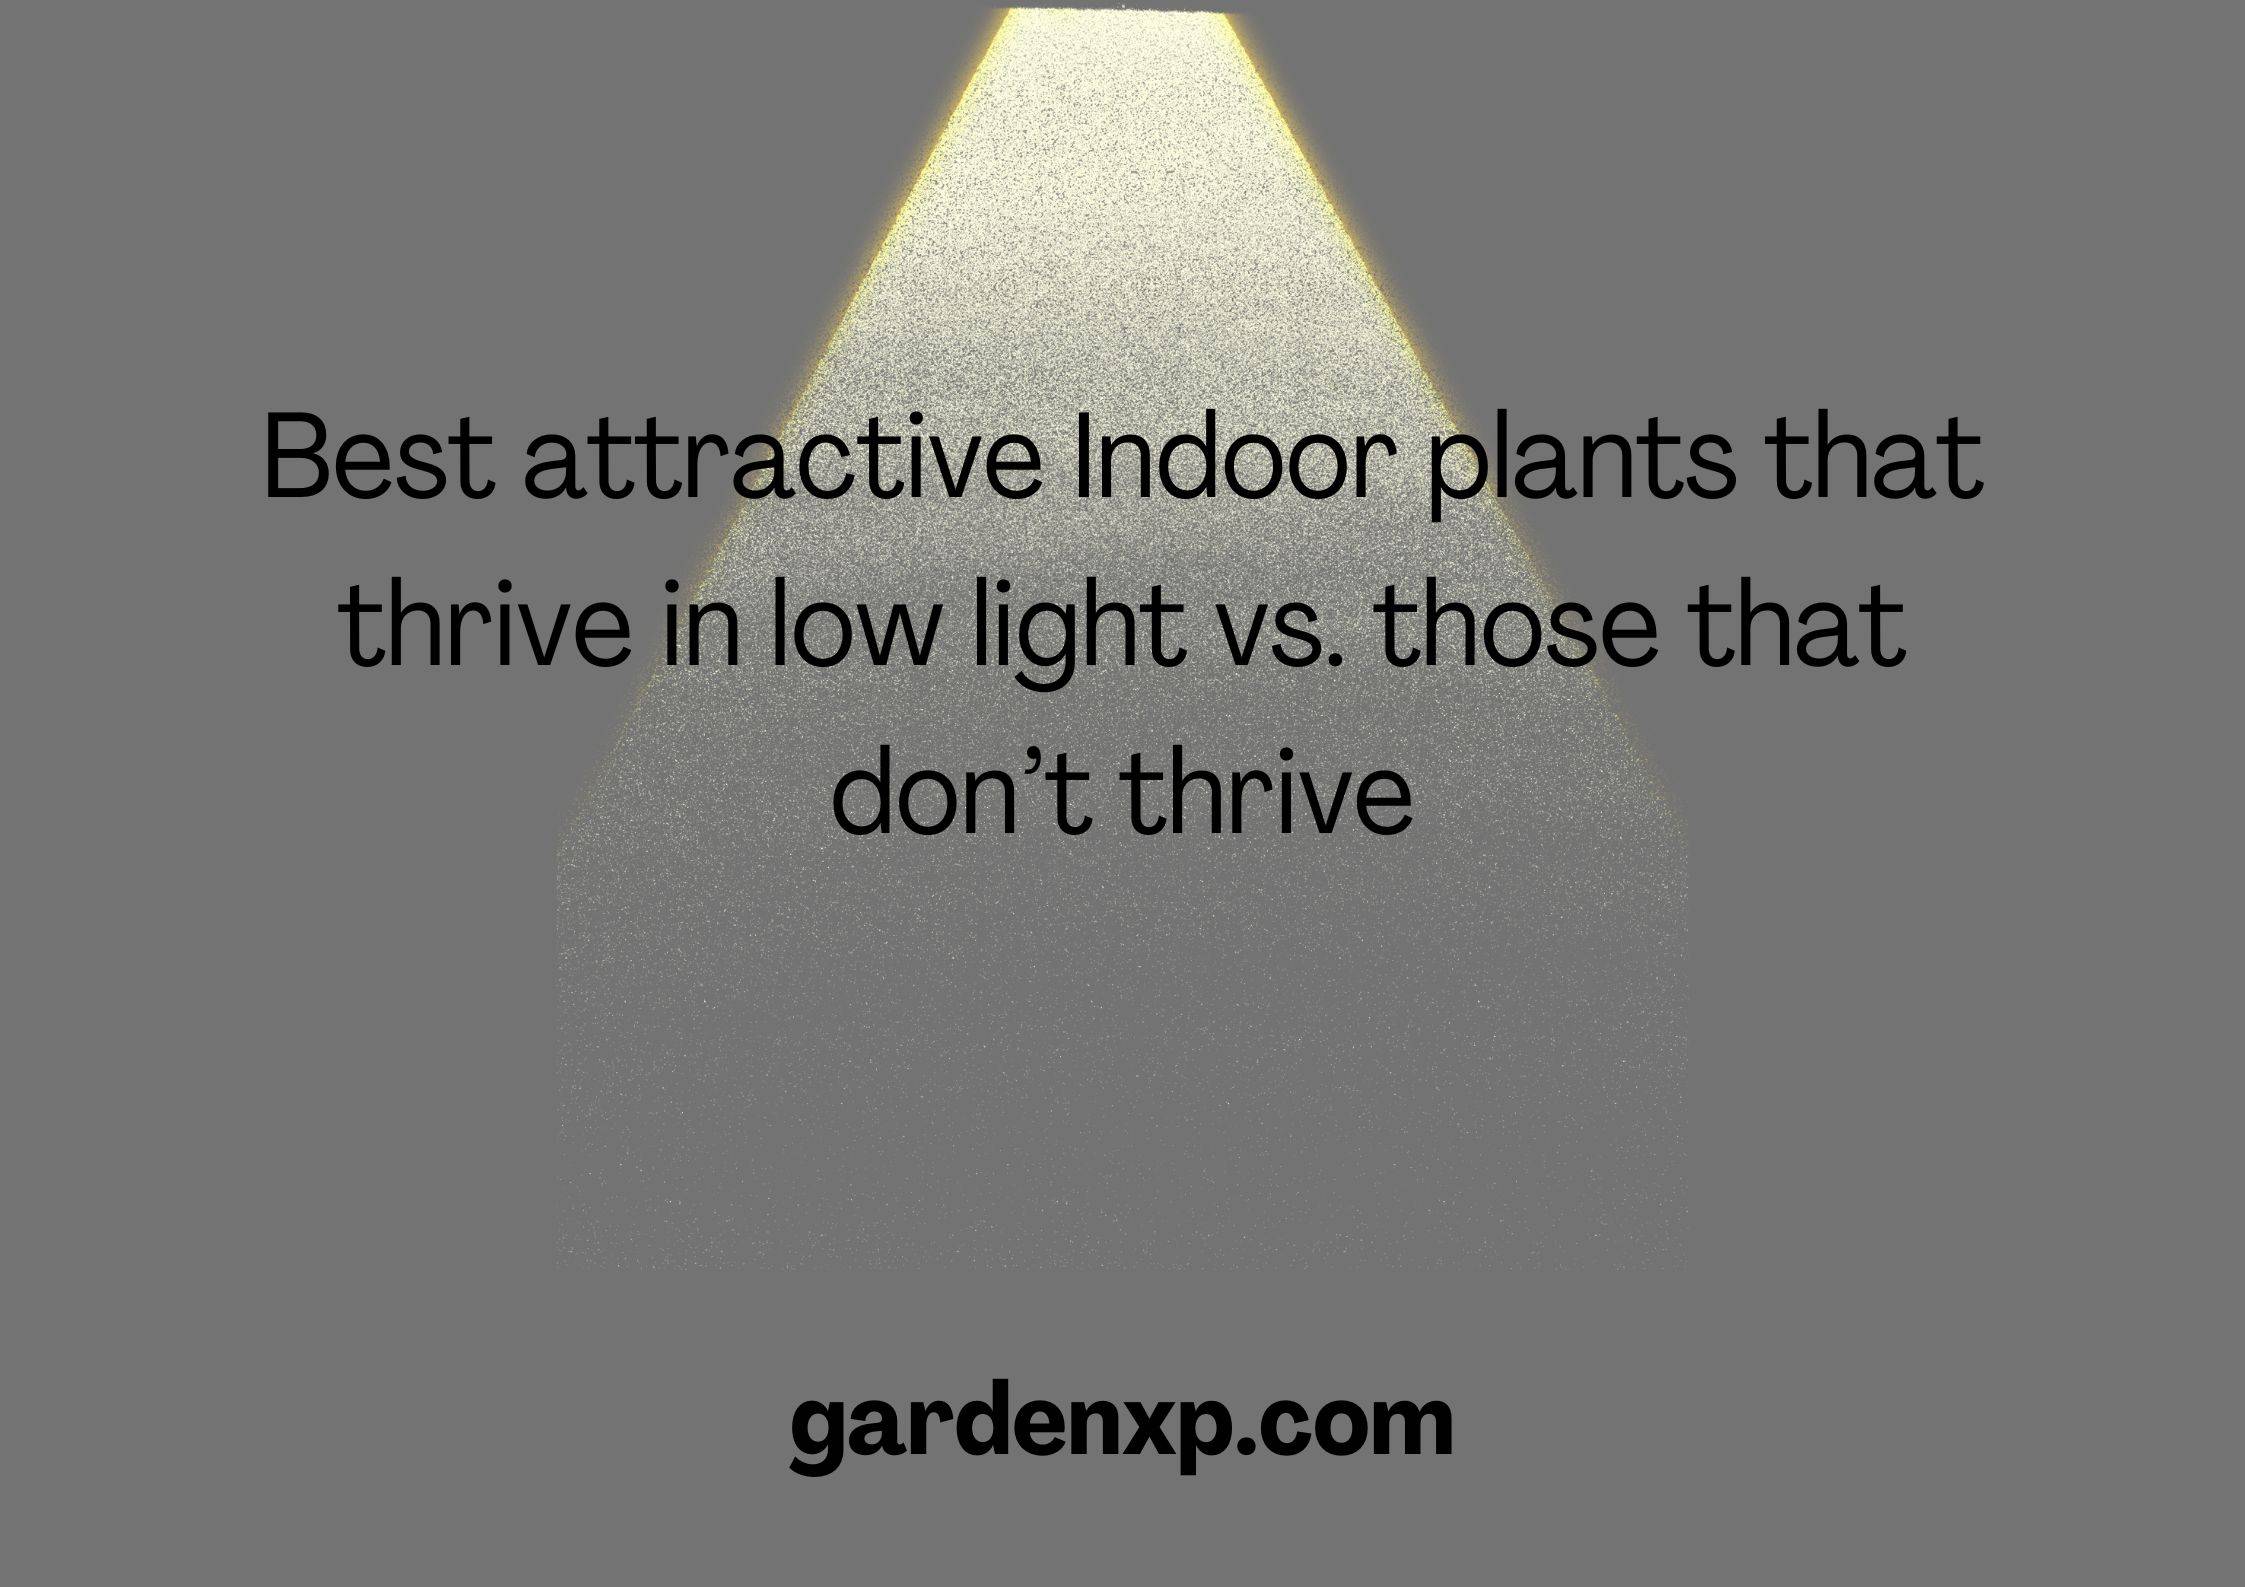 7 Best Indoor trees that thrive in low light and 5 that won't